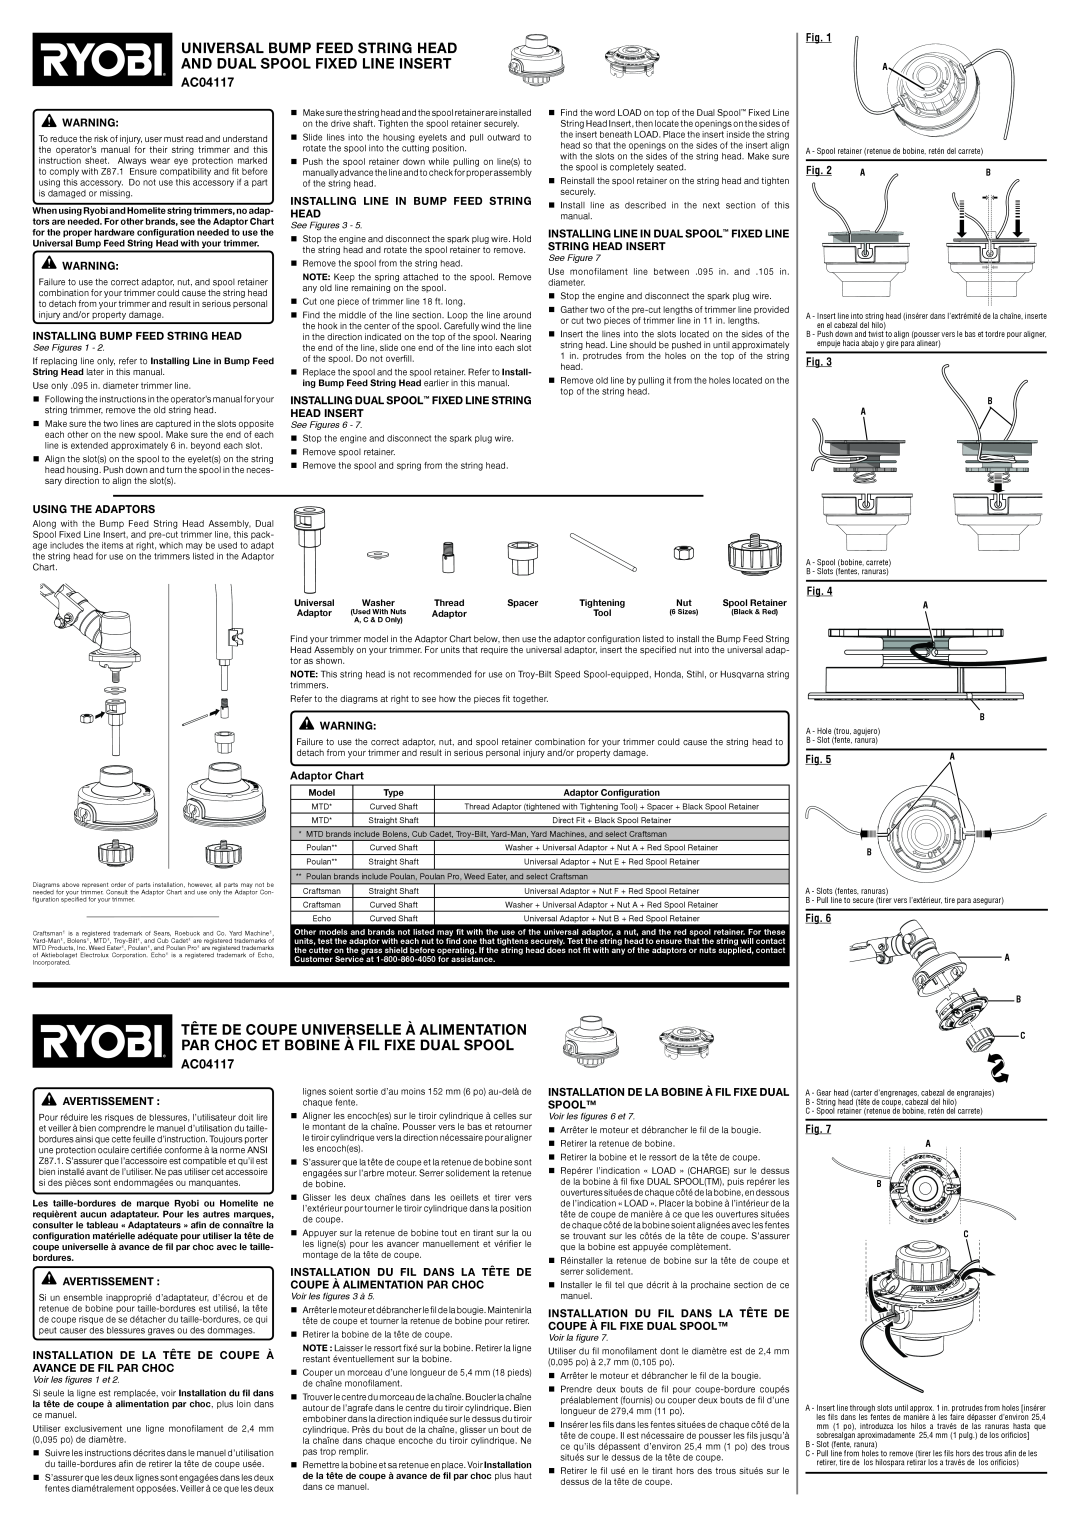 Ryobi AC04117 instruction sheet universal bump feed string head and dual spool fixed line insert, See Figures 